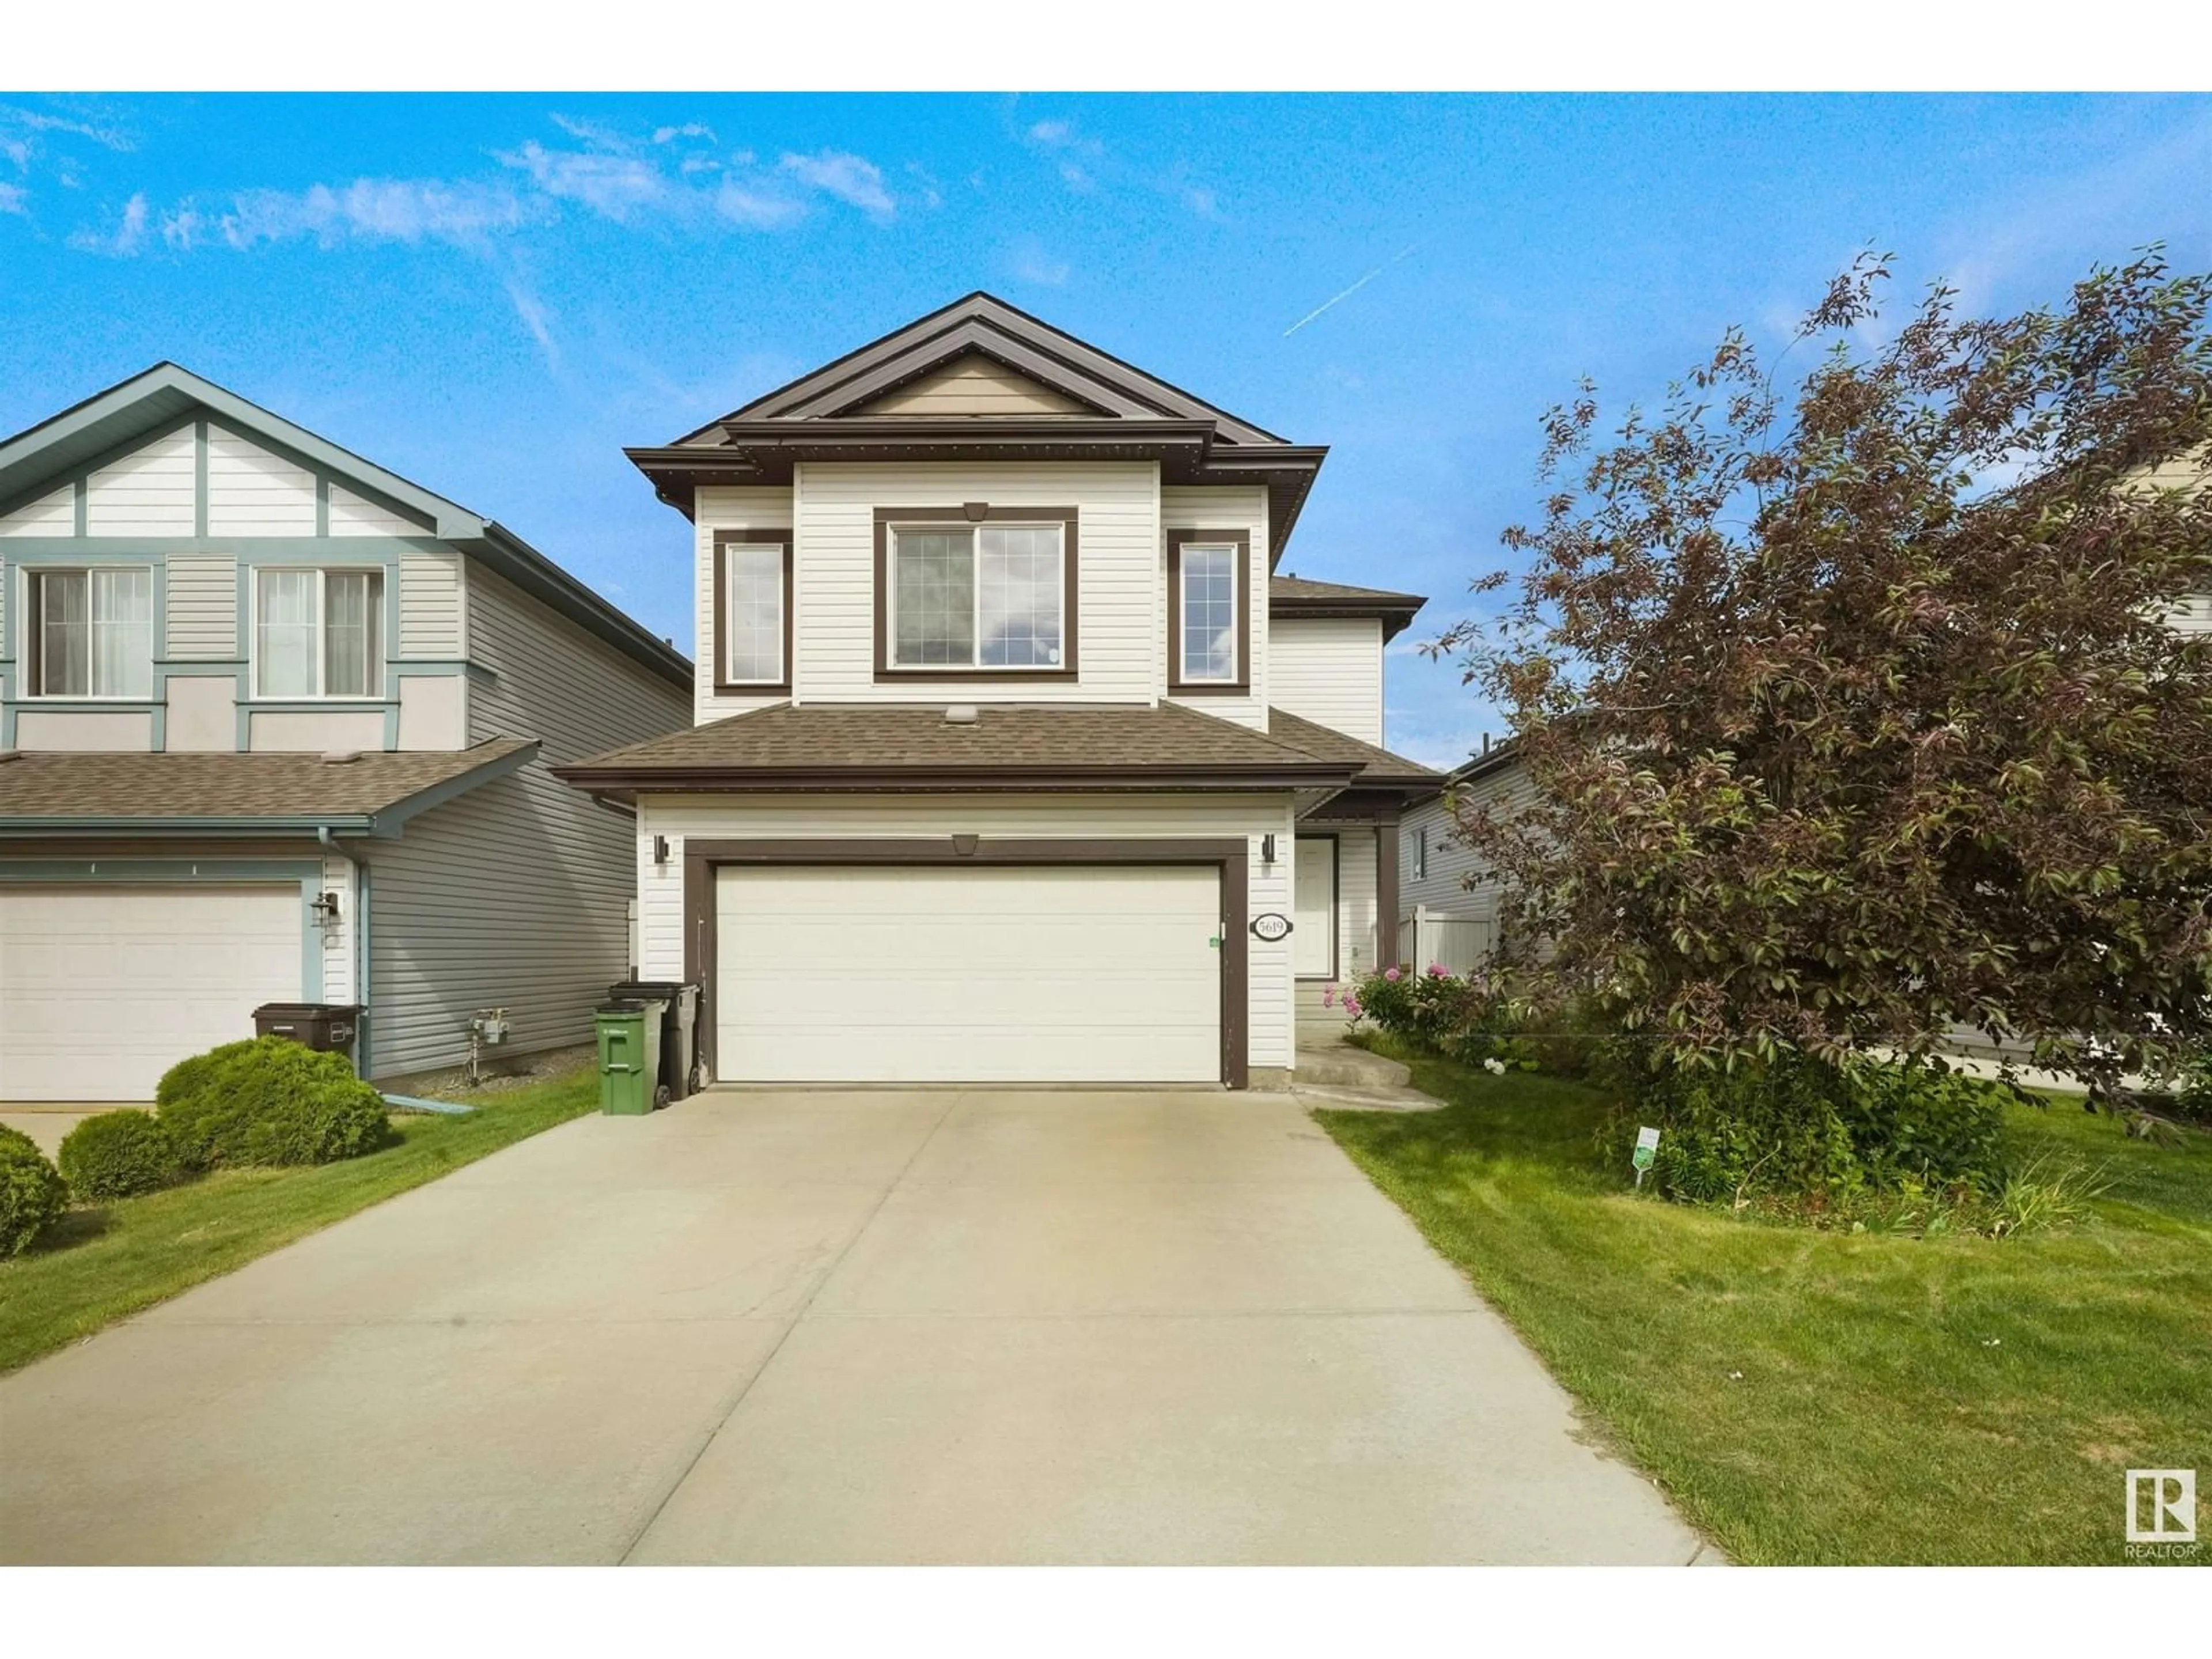 Frontside or backside of a home for 5619 209 ST NW, Edmonton Alberta T6M0E9